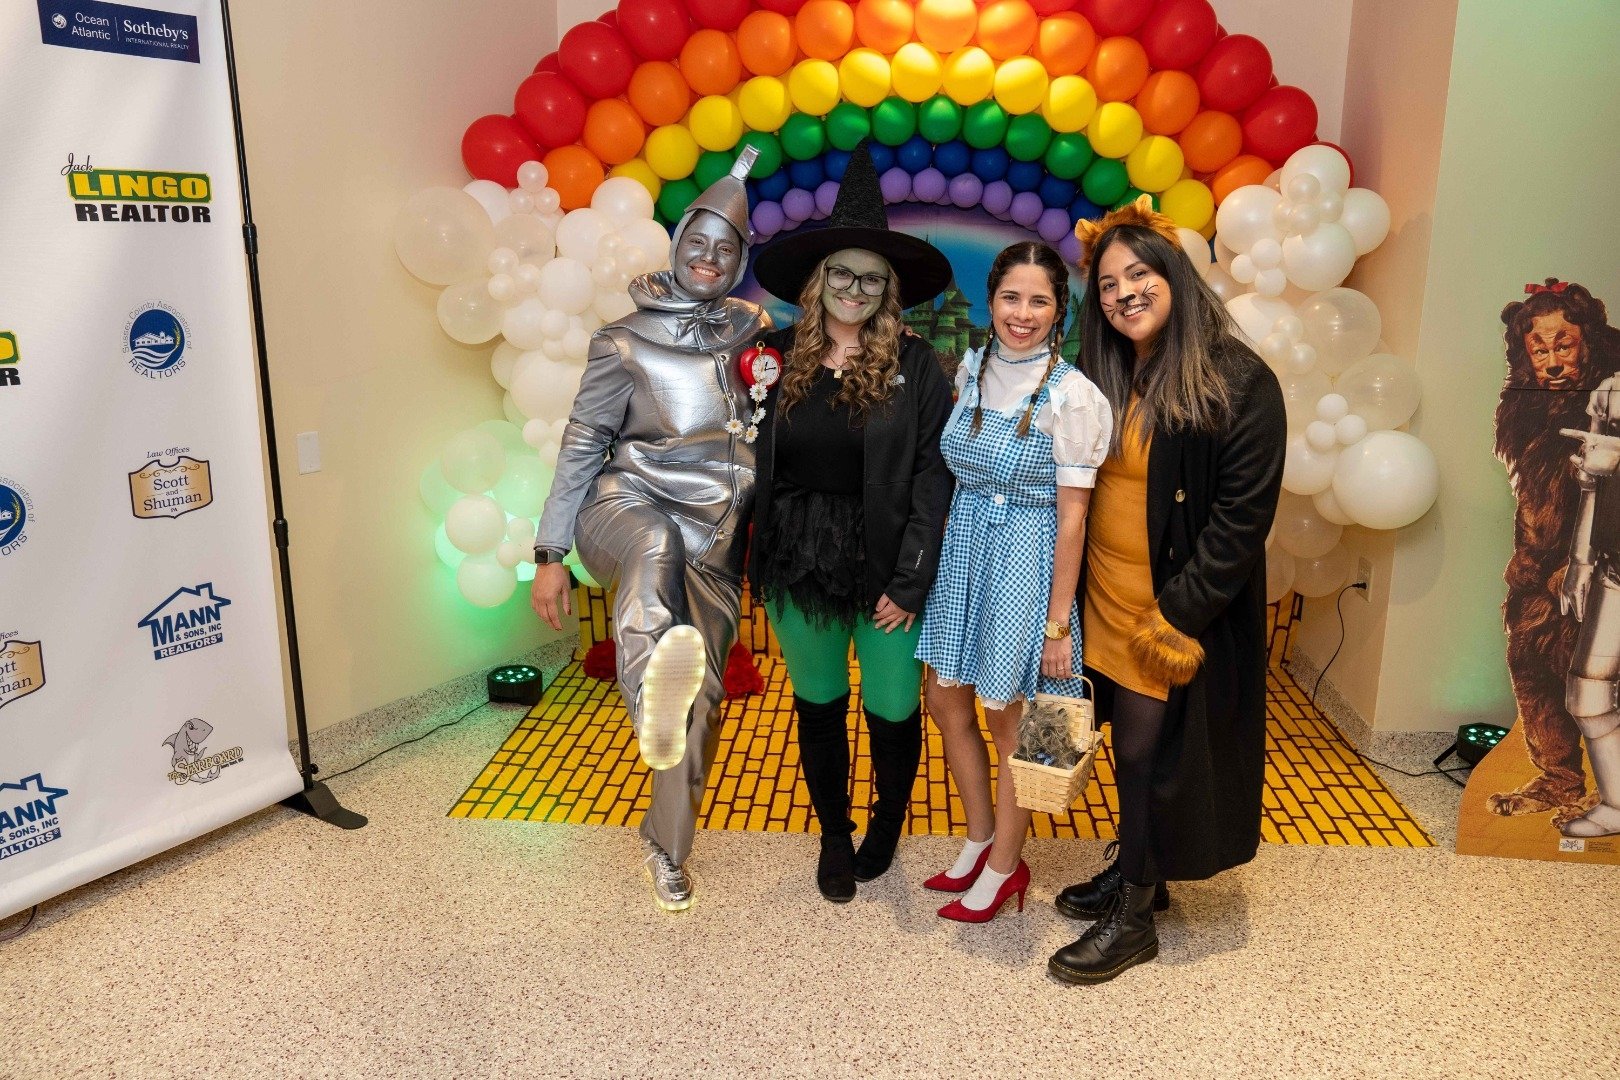 wizard-of-oz-themed-event.jpg